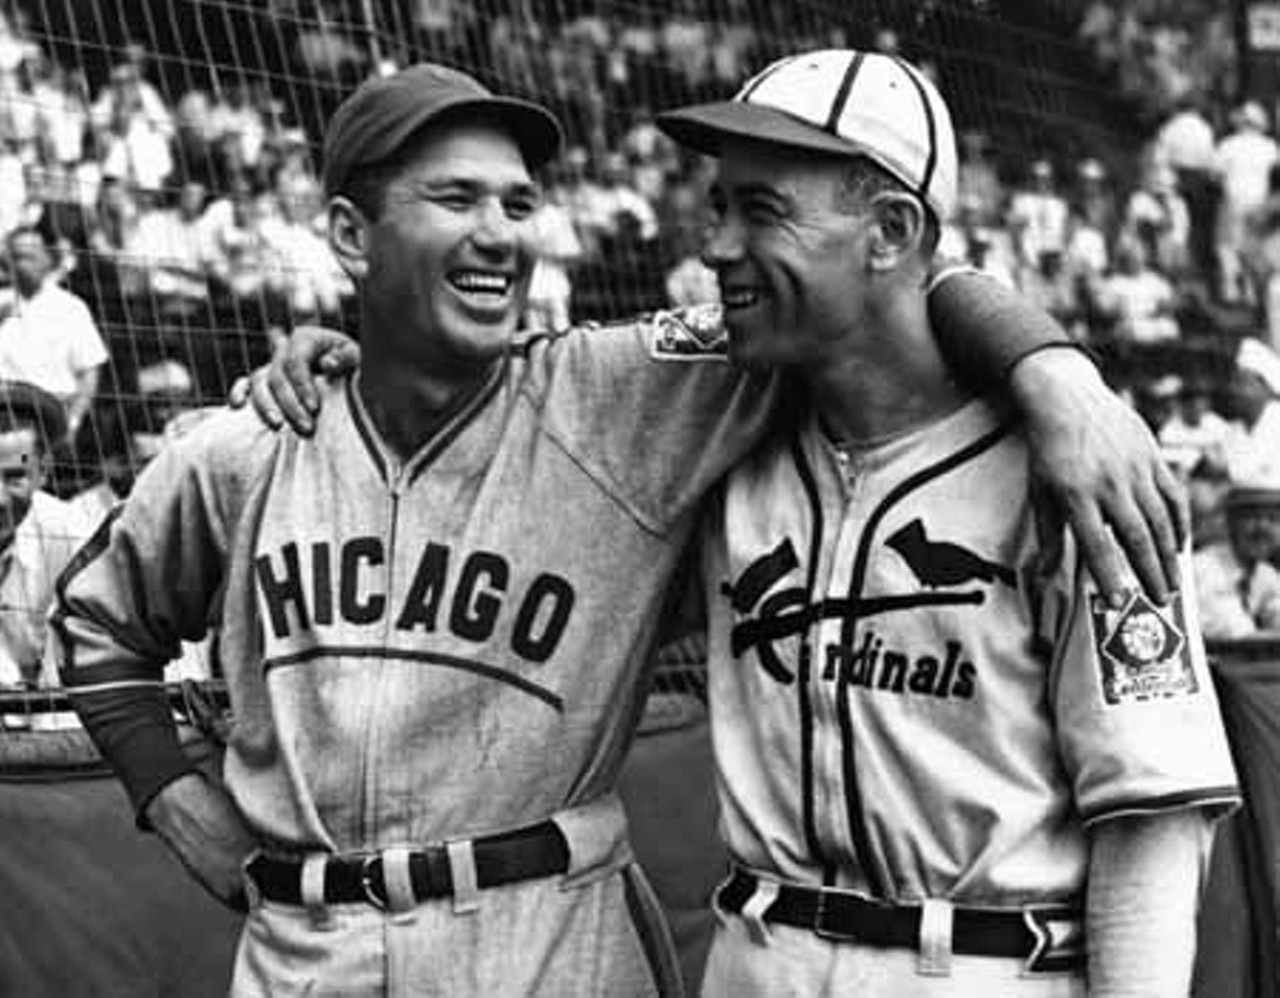 Cardinals pitcher Paul Dean with his brother Dizzy Dean. Though Dizzy is a Cub in this photo, he was best known as the ace of the Cardinals' Gashouse Gang. The Cubs only purchased his contract after his best years were over.